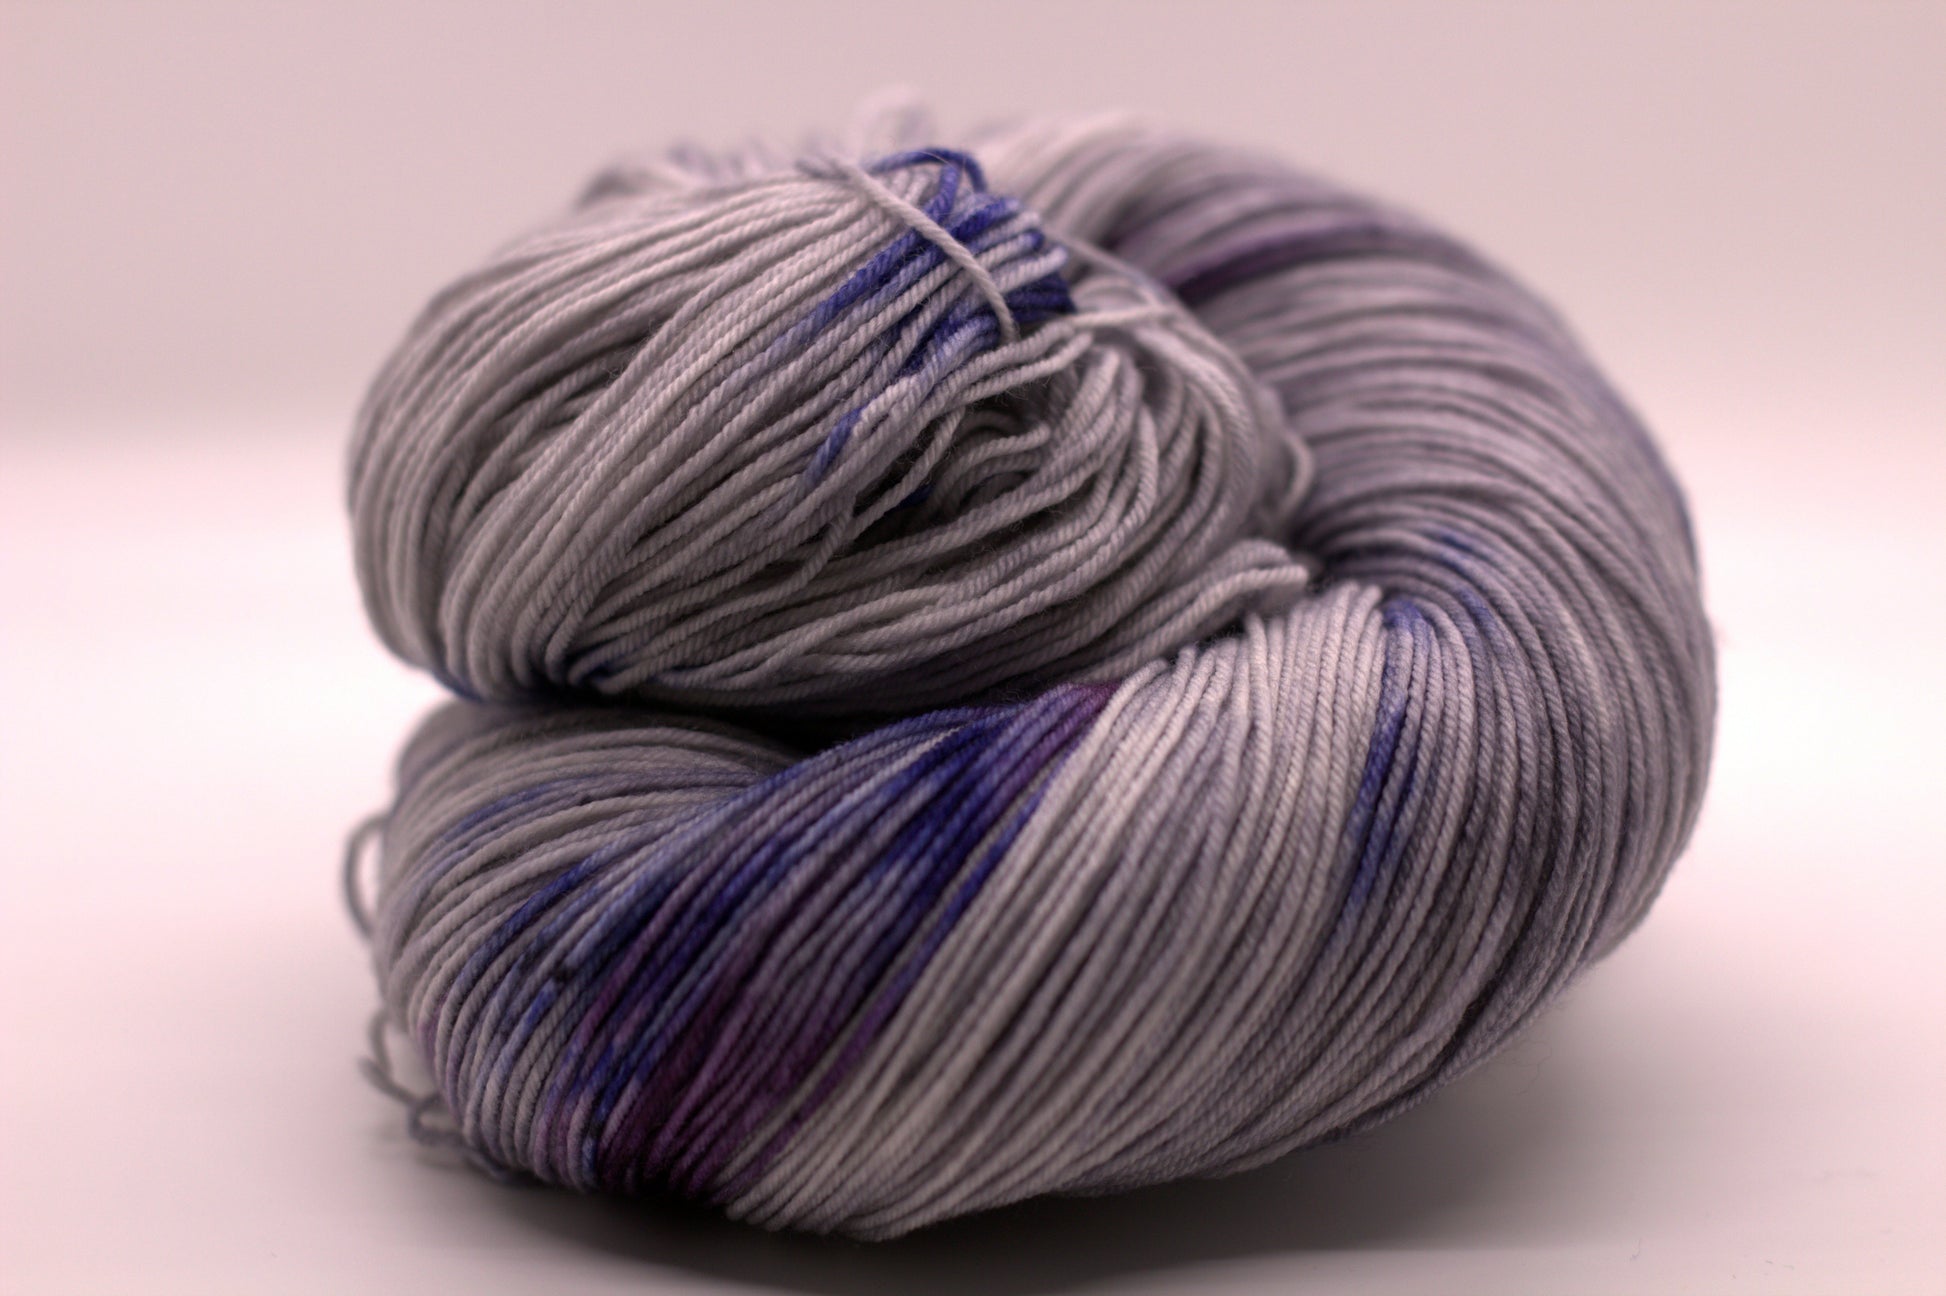 One curled skein of gray, blue and purple variegated yarn on white background.